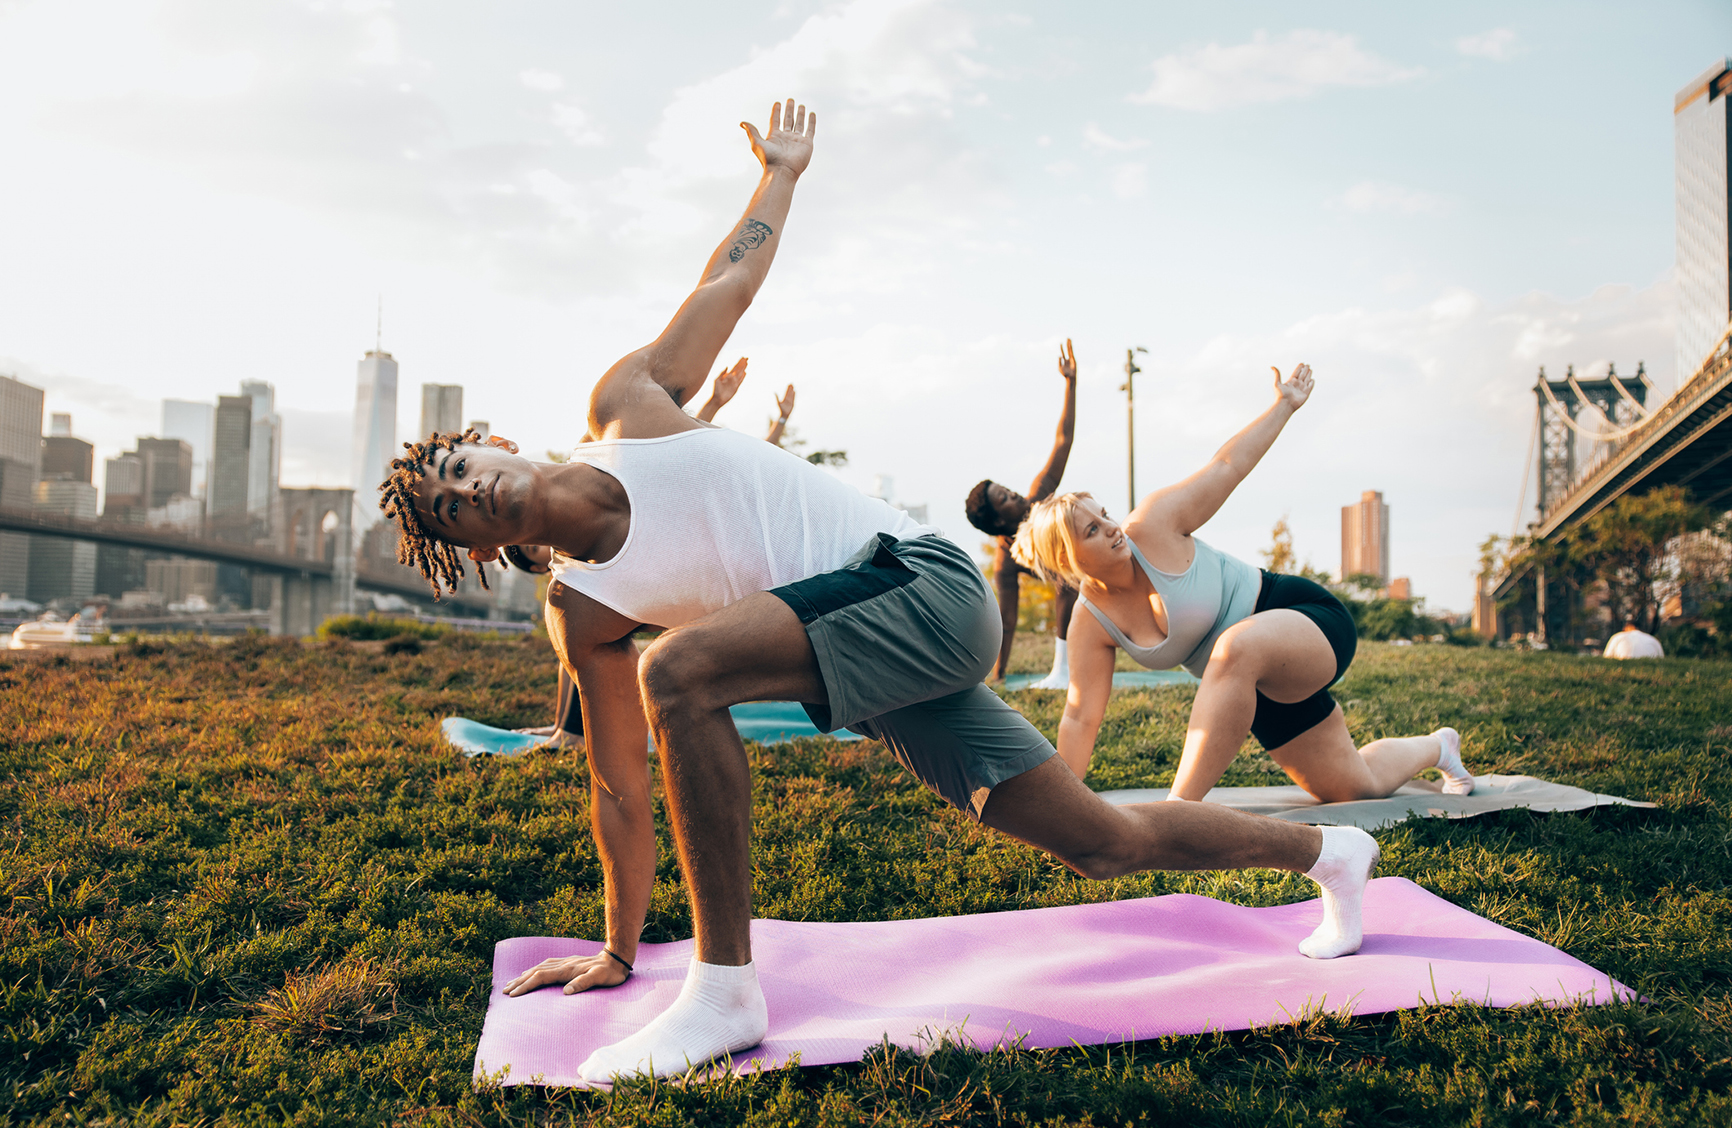 Group of young people attending to a yoga class outdoors at sunset with New York cityscape on their background. They are meditating and relaxing.